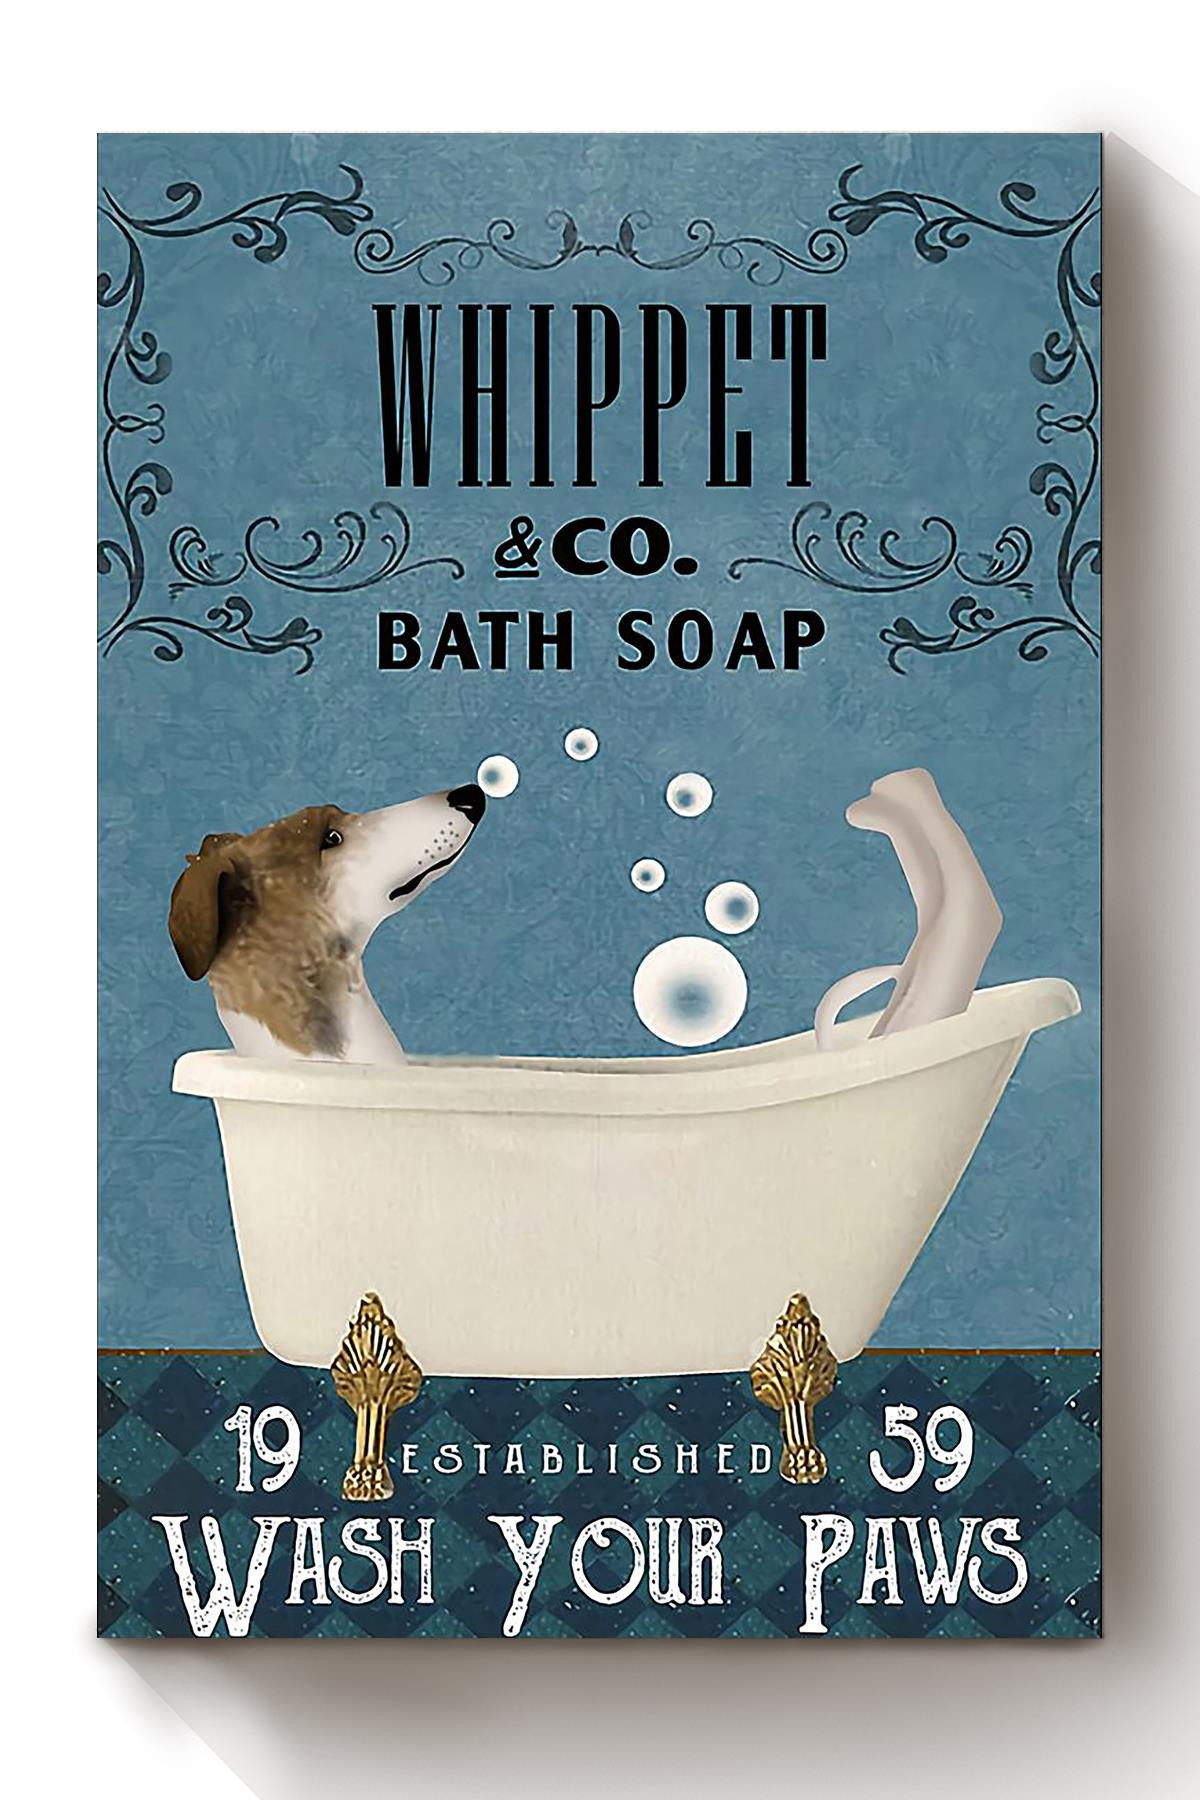 Wash Your Pasws Canvas Bathroom Wall Decor For Whippet Foster Dog Lover Canvas Wrapped Canvas 8x10